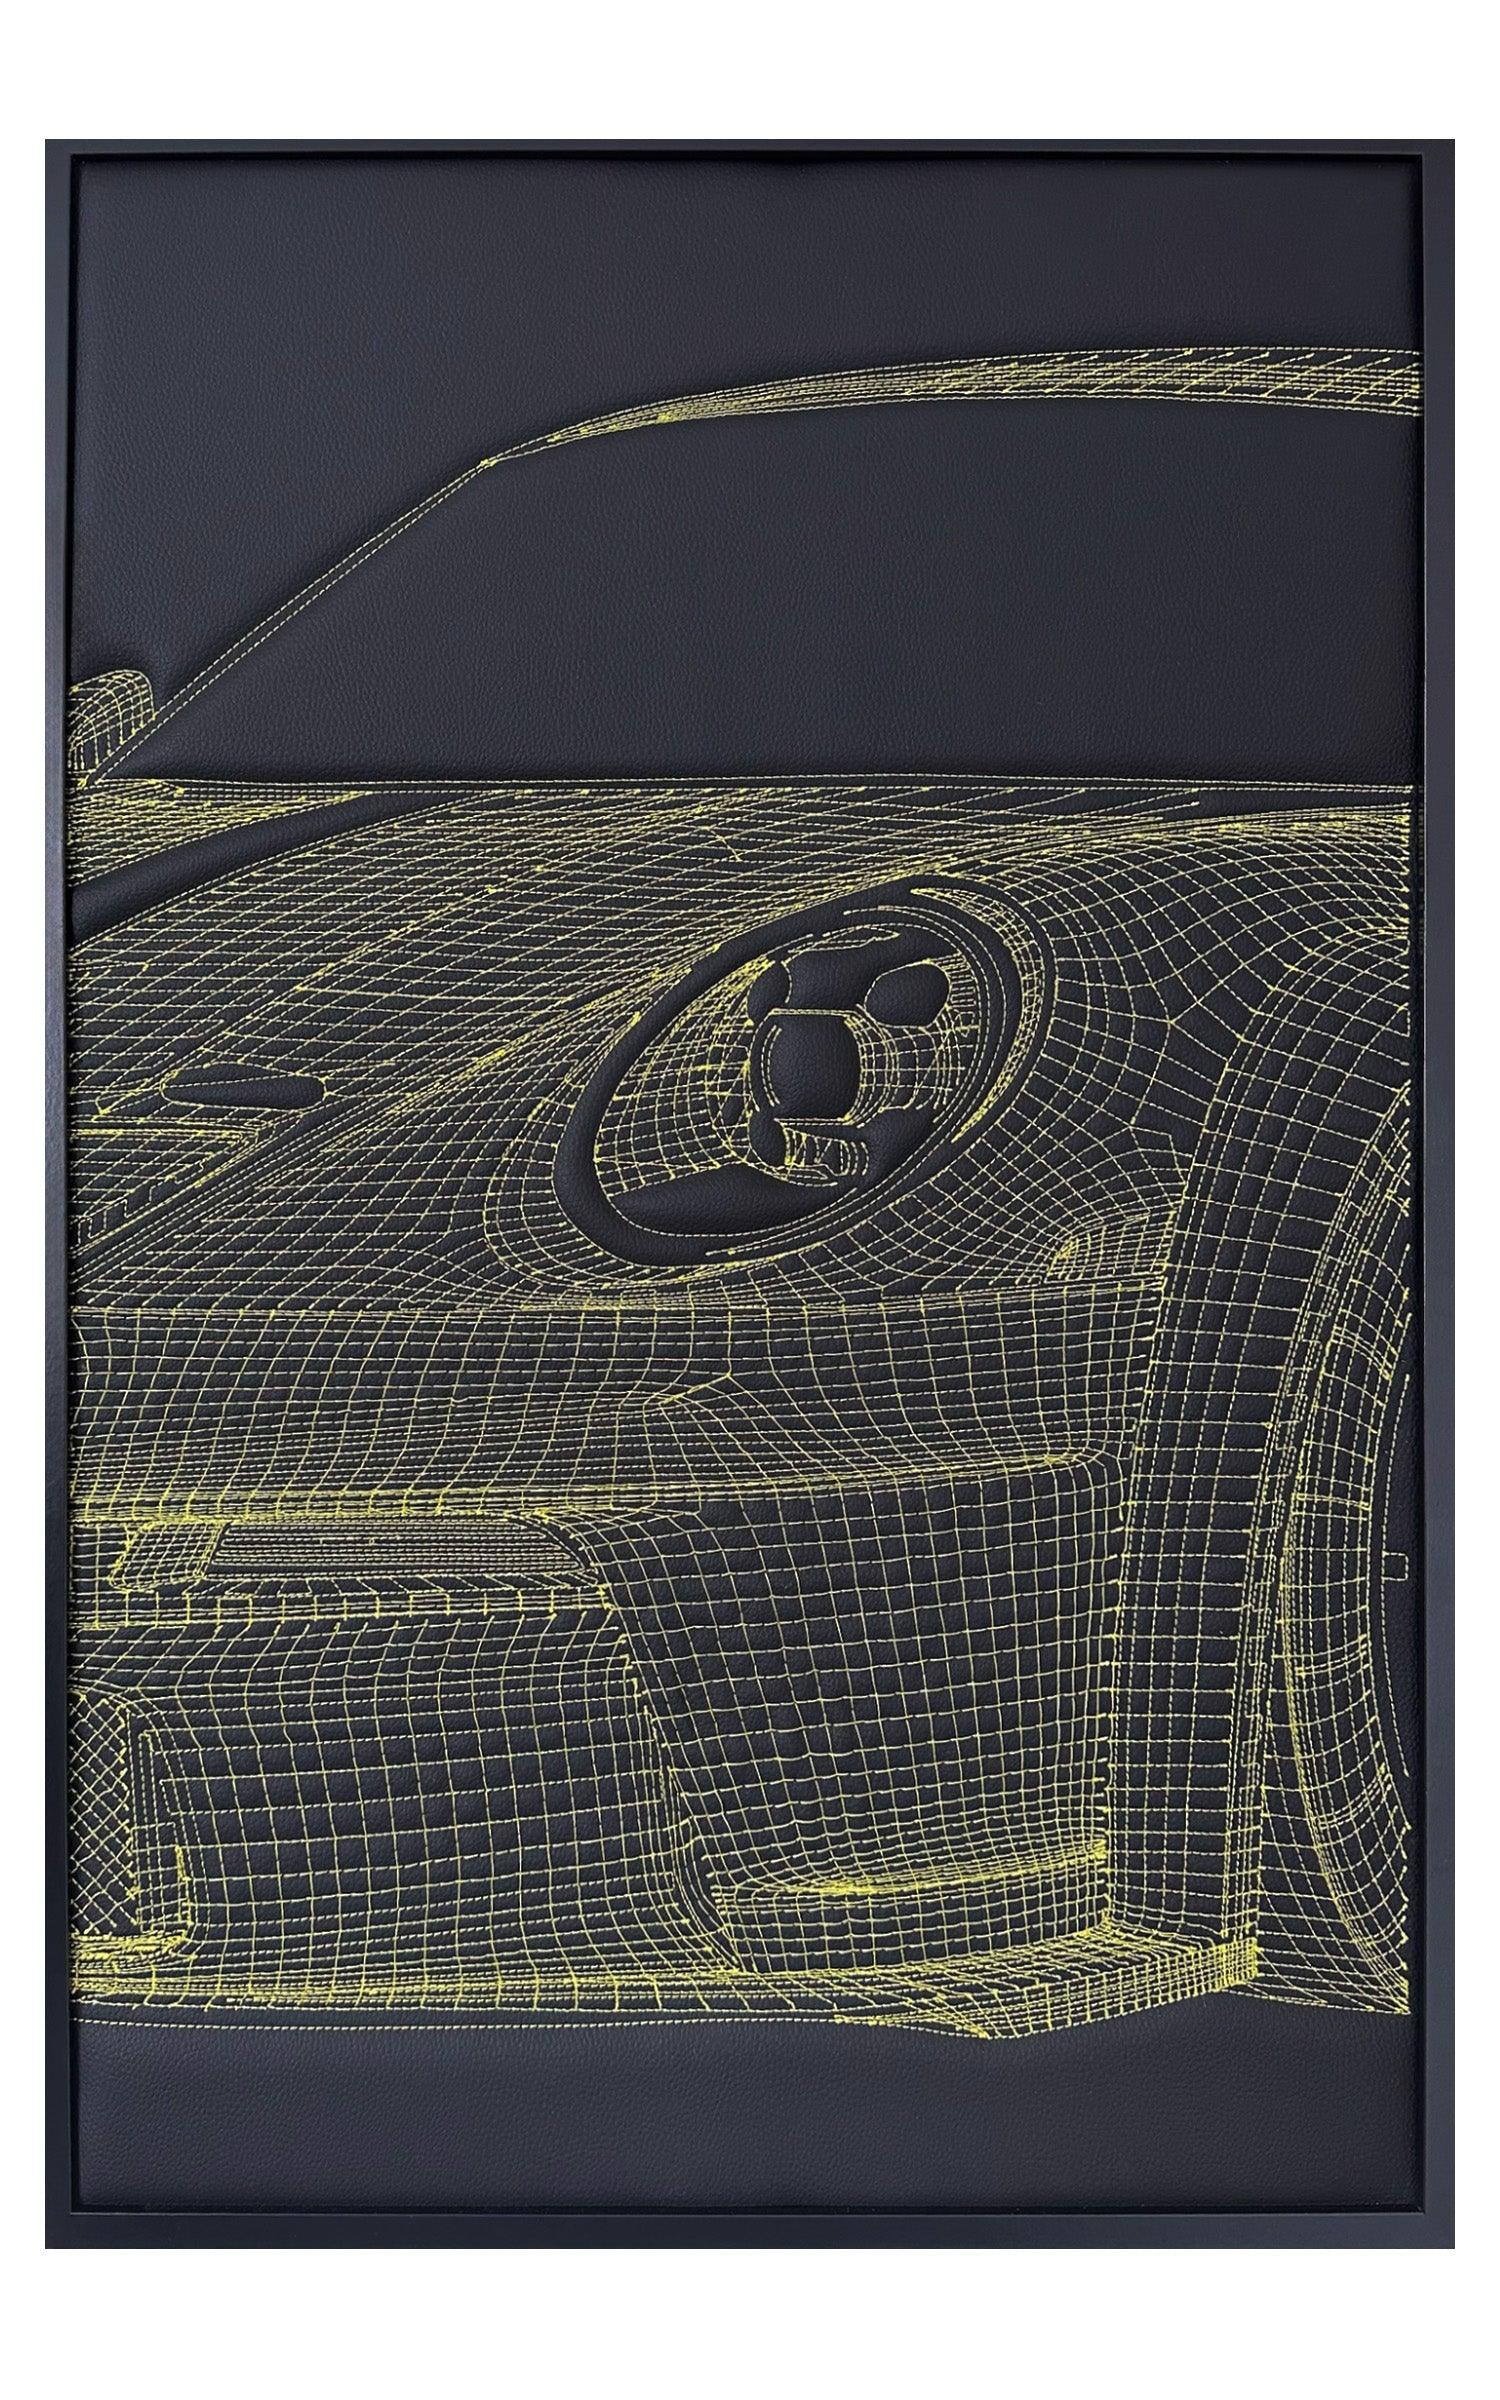 Porsche 911 GT3 Inspired 3D Luxury Eco-Leather Wall Decoration